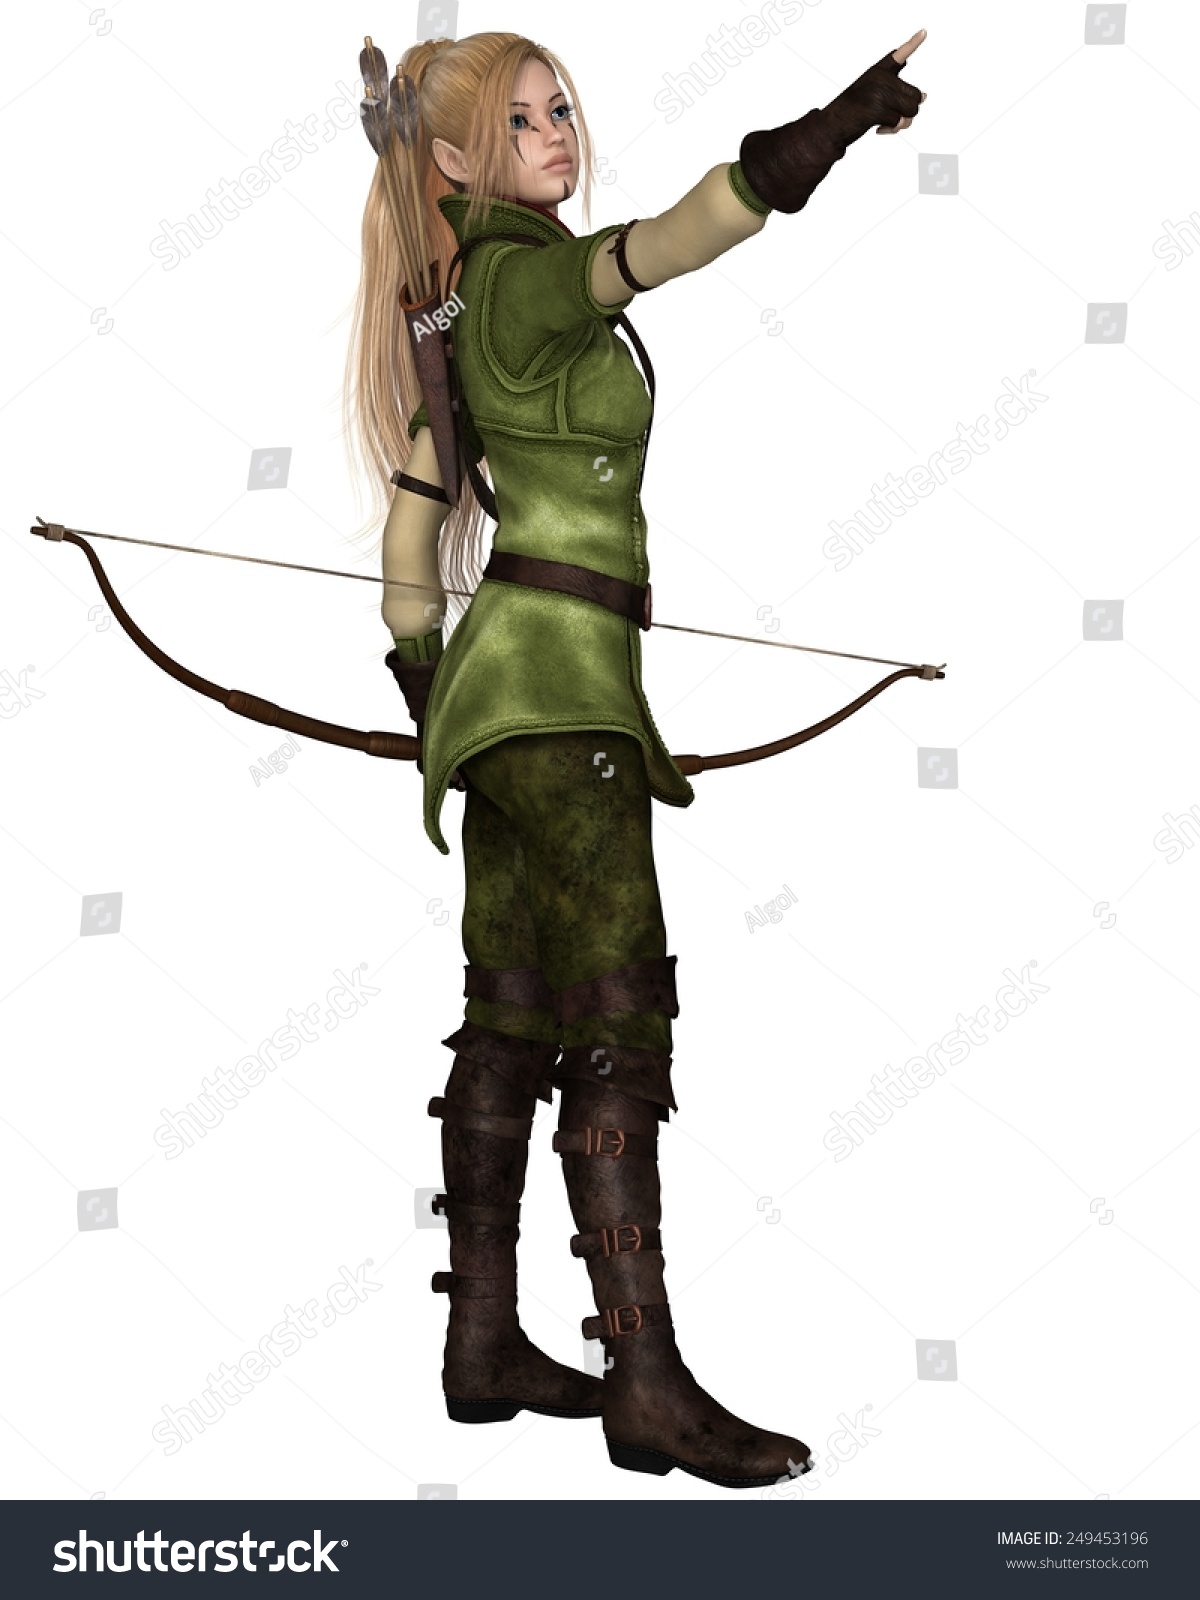 Fantasy Illustration Of A Blonde Female Elf Archer With Bow And Arrows ...